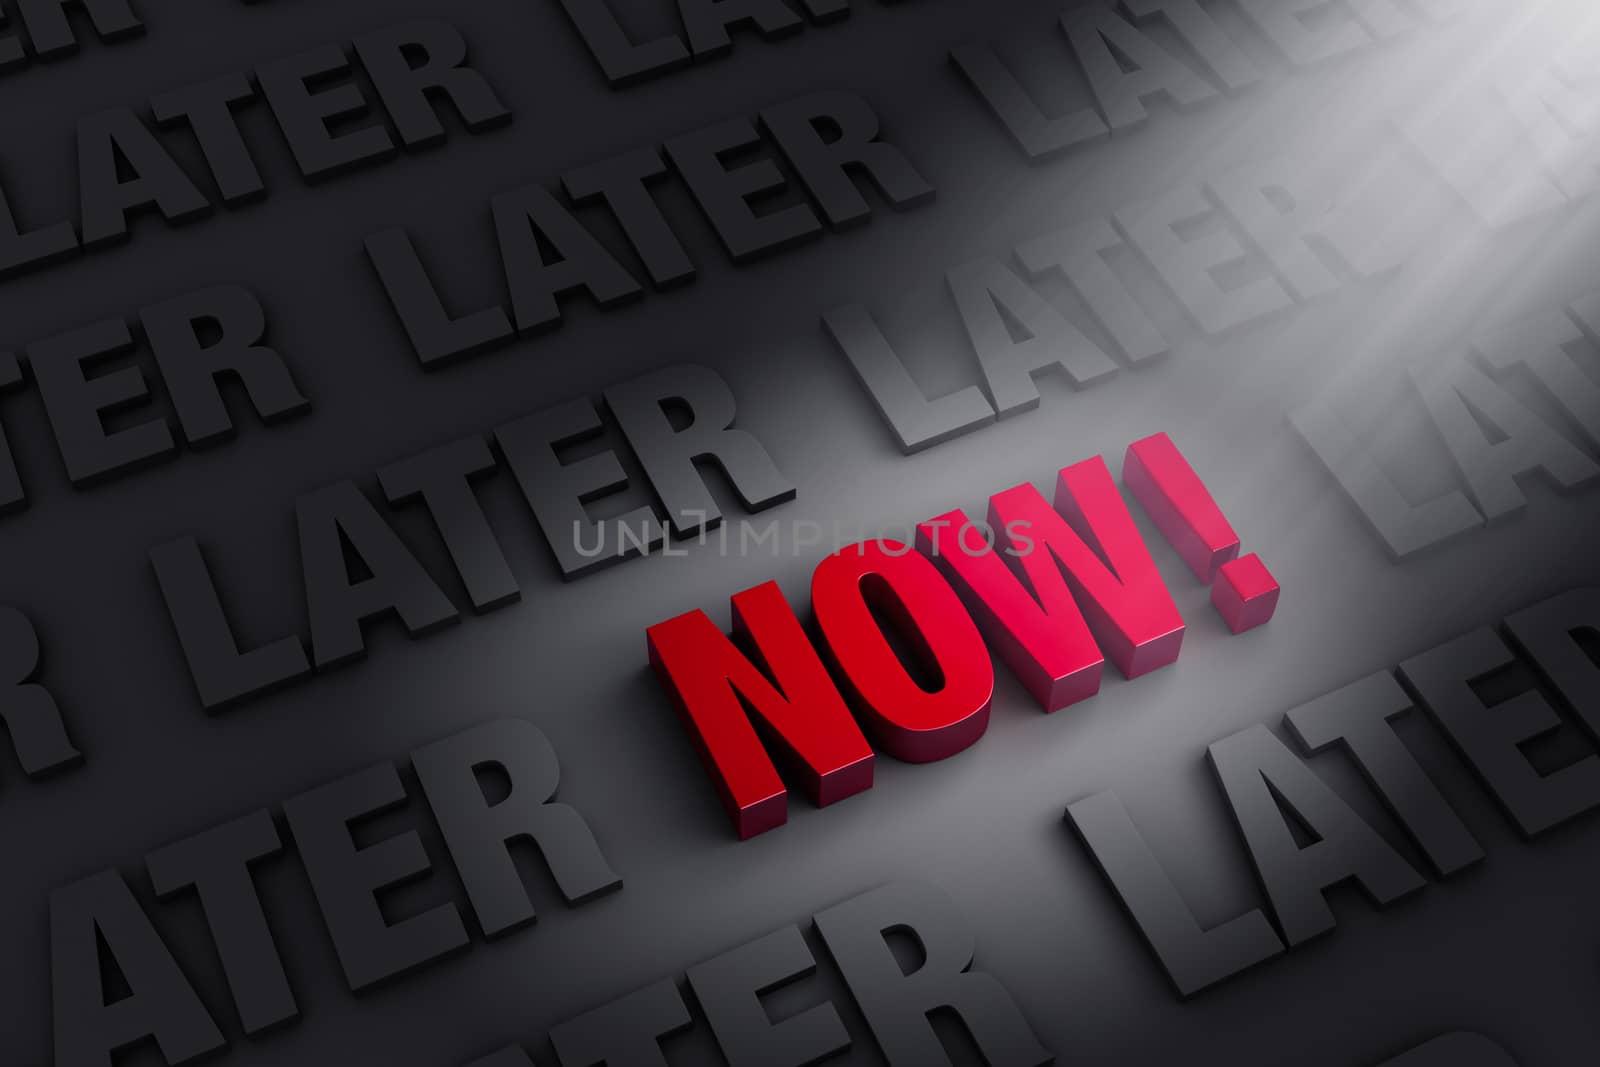 A spotlight illuminates bright, red "NOW" on a dark background of "LATER"s.